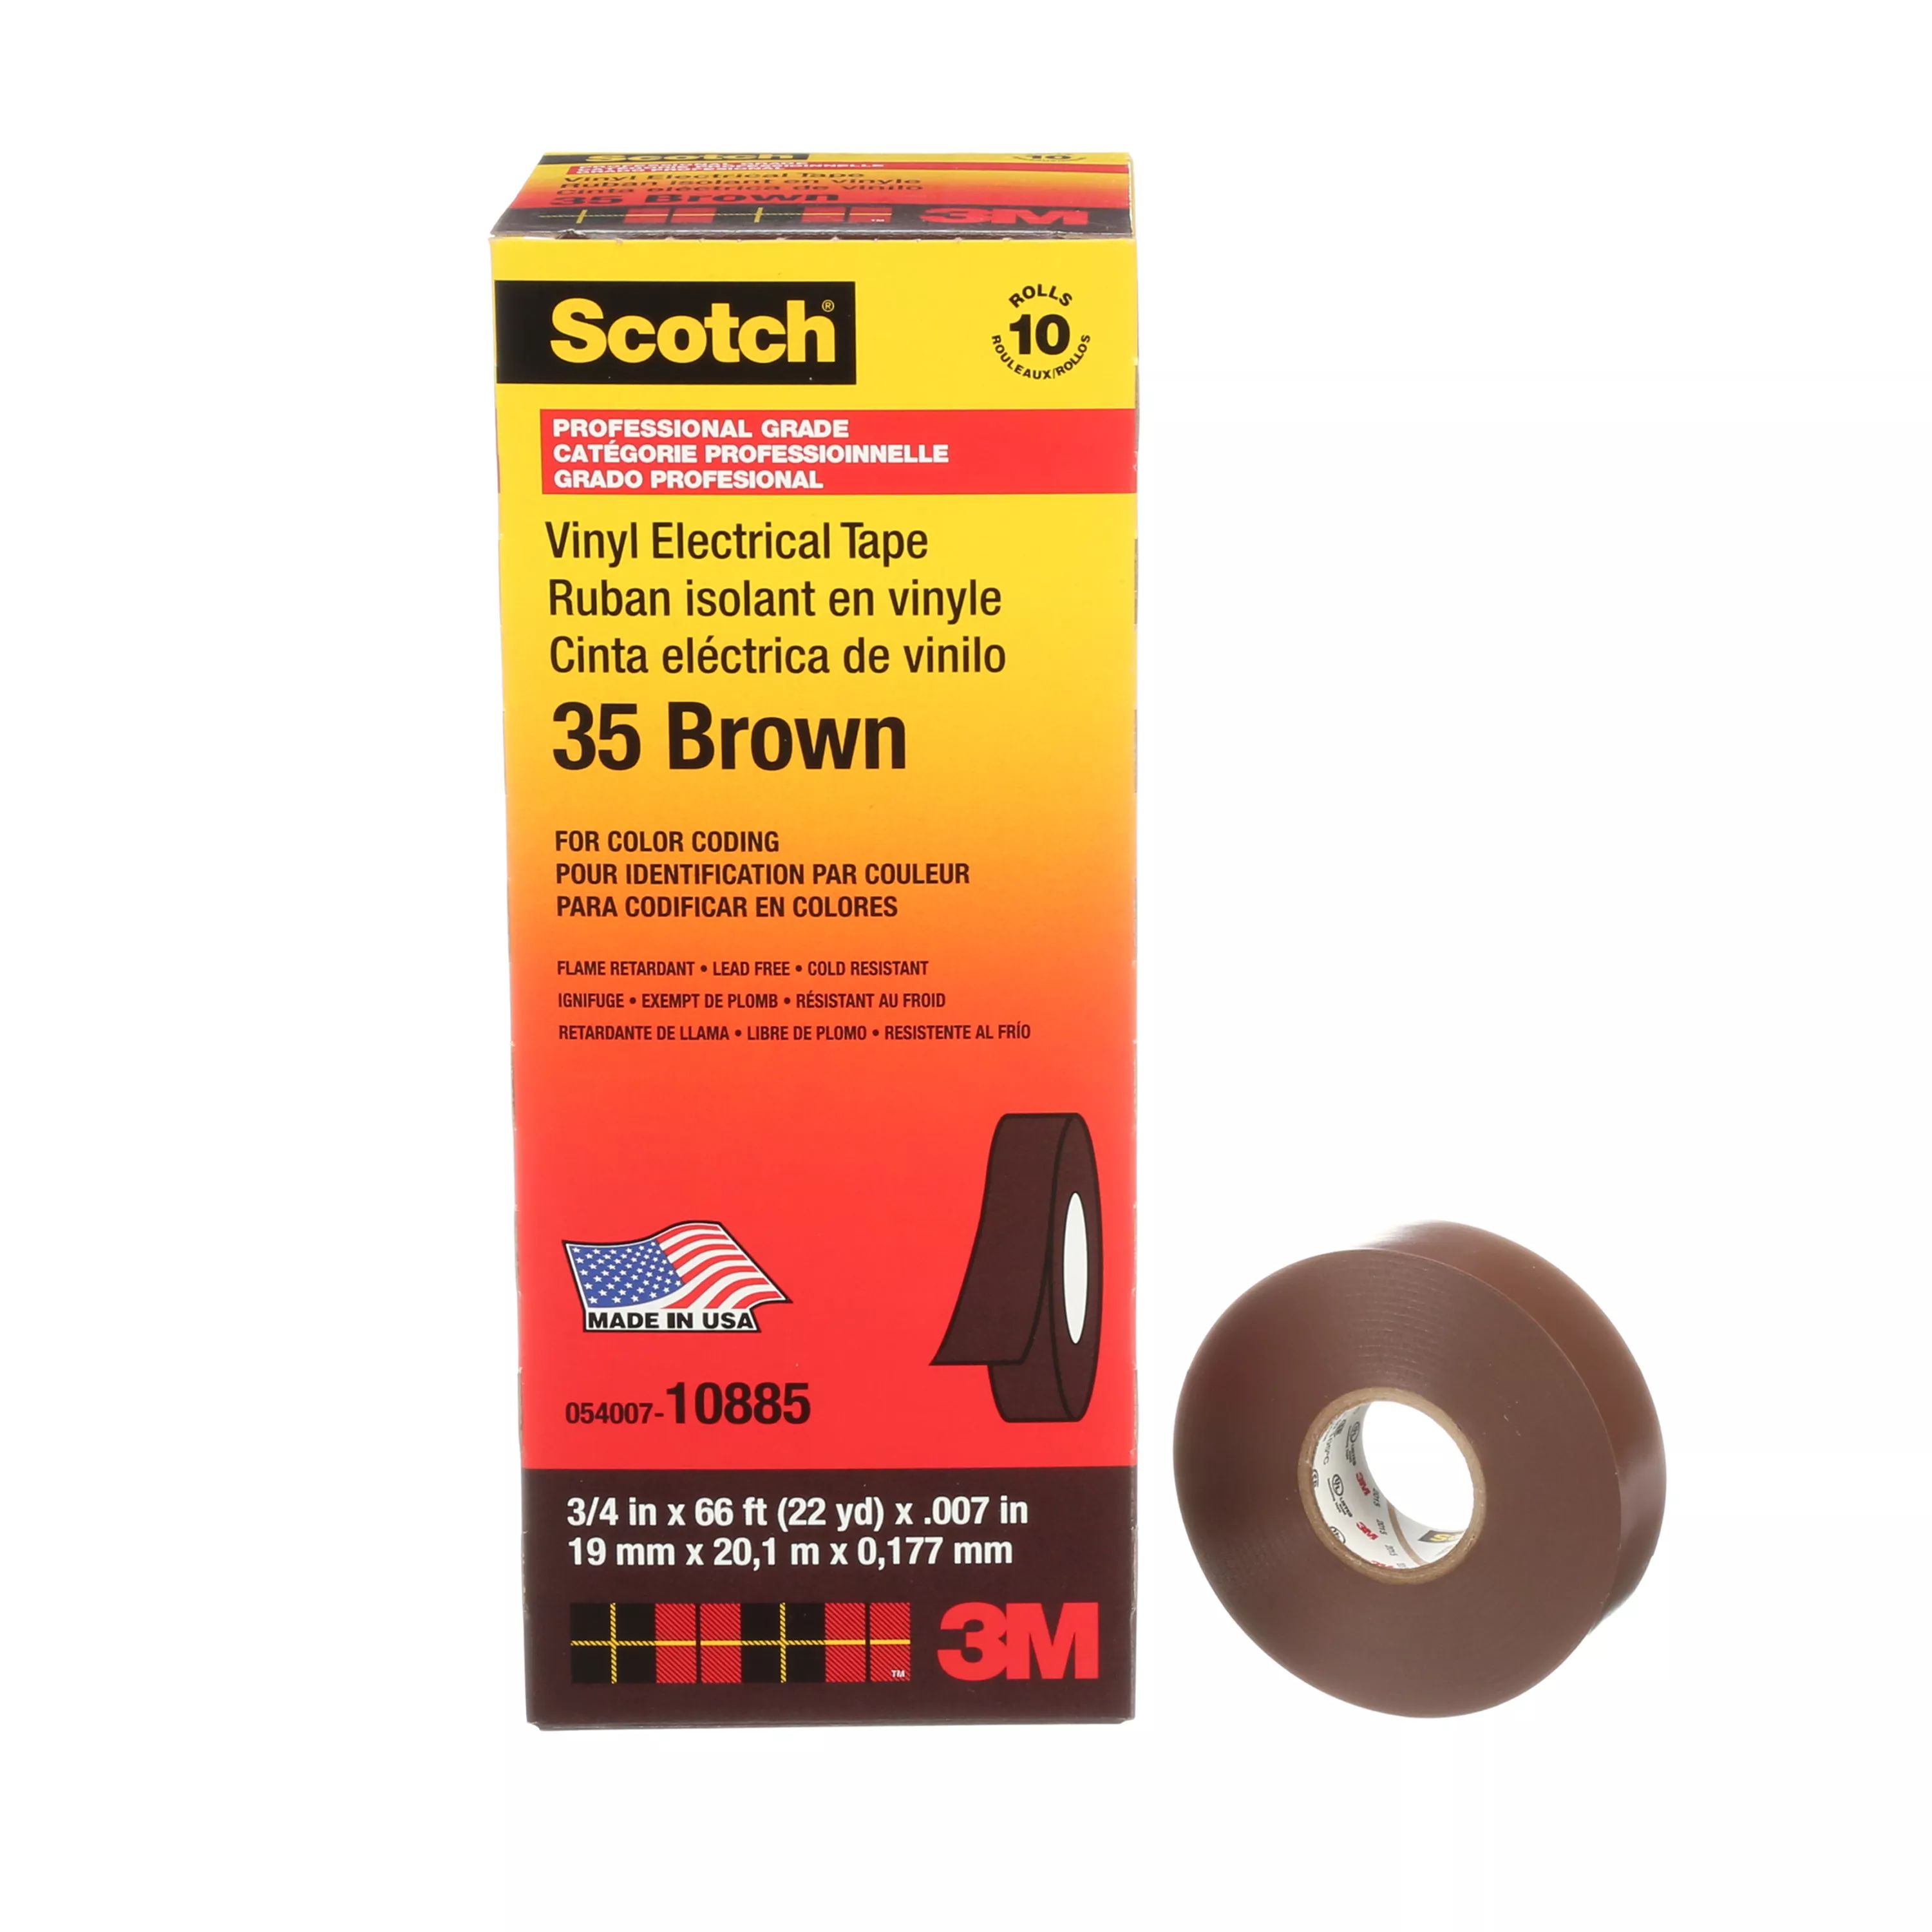 Scotch® Vinyl Color Coding Electrical Tape 35, 3/4 in x 66 ft, Brown, 10
rolls/carton, 100 rolls/Case